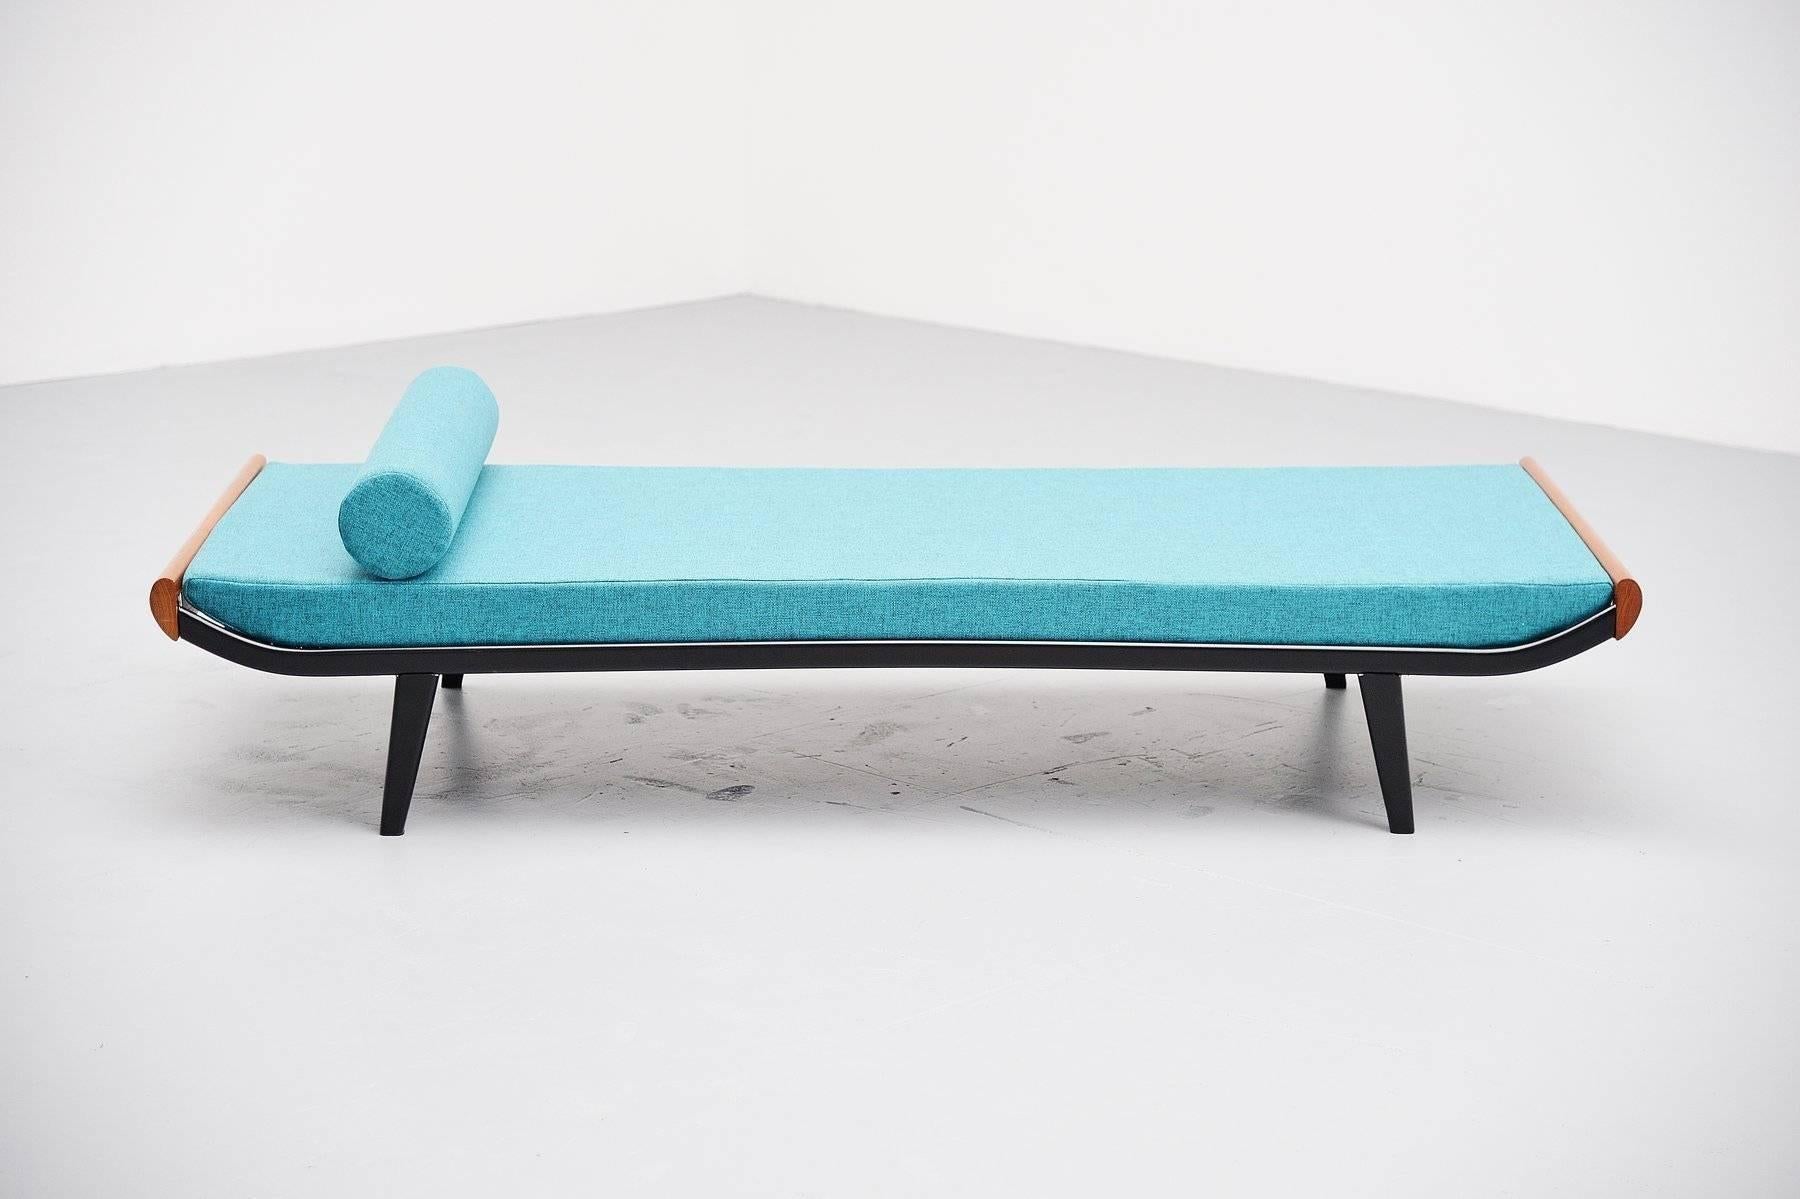 Dick Cordemeijer Cleopatra Daybed with Mattress for Auping, 1954 (Metall)